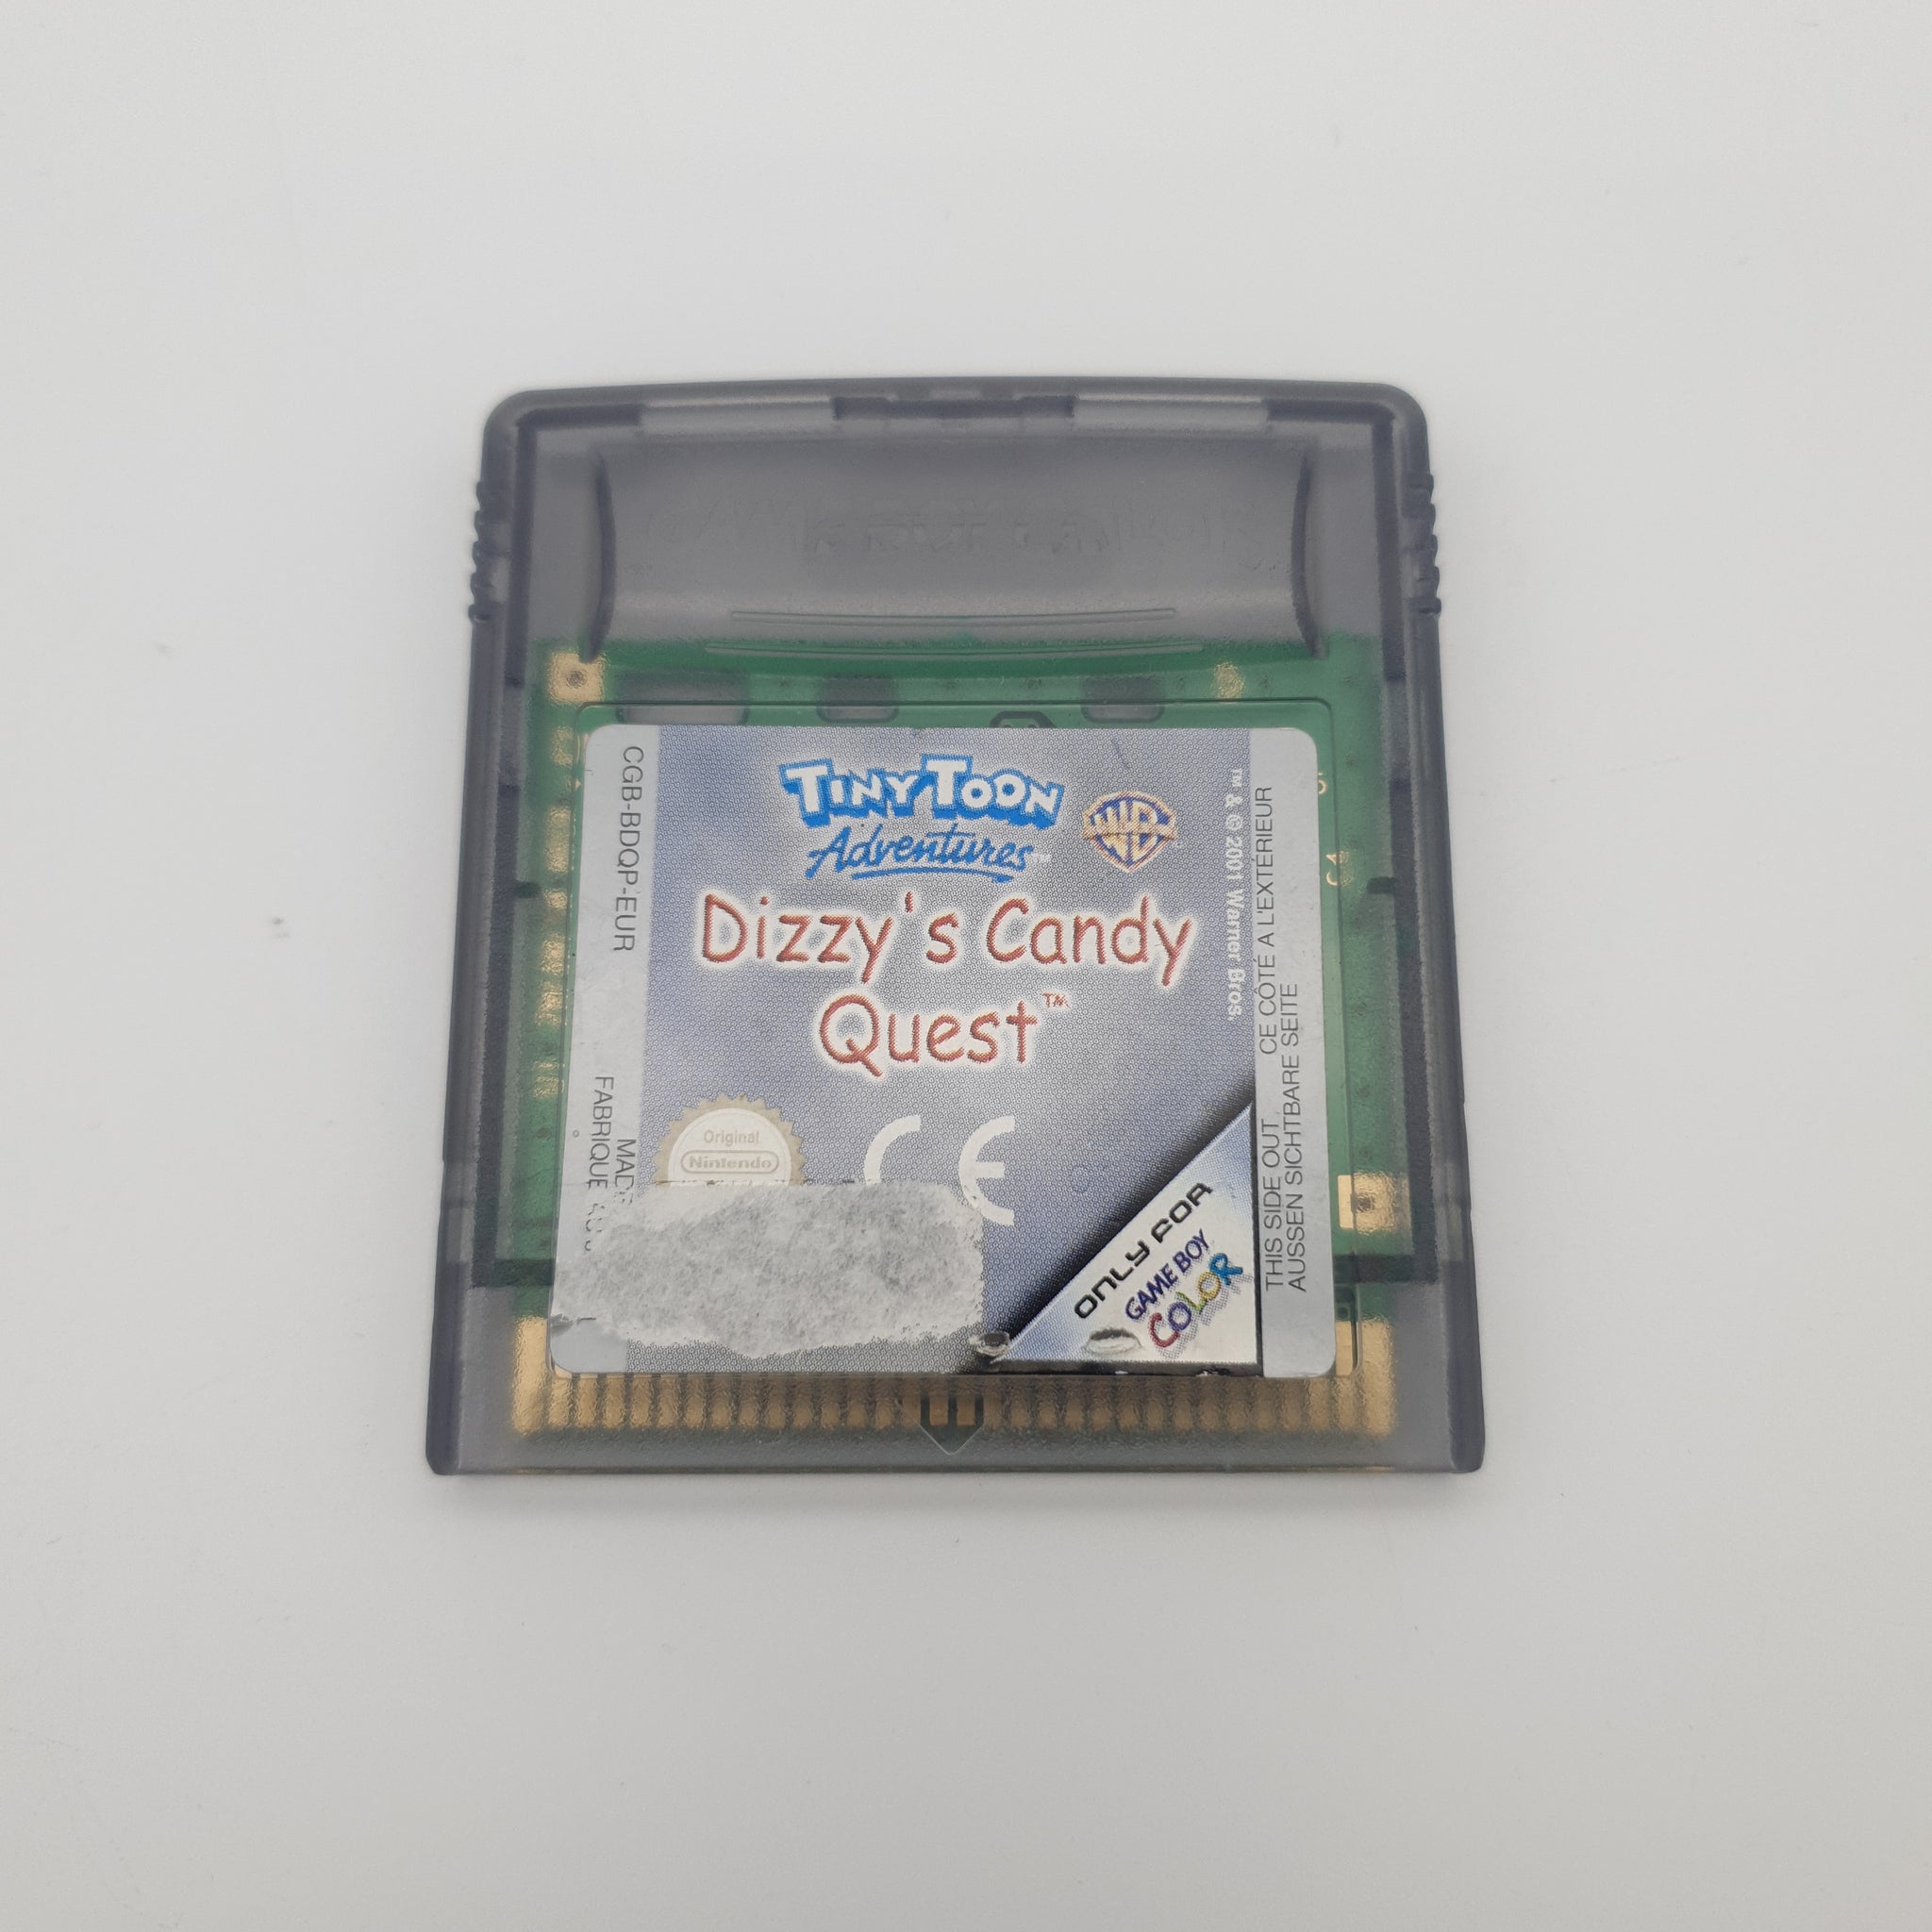 TINY TOON ADVENTURE DIZZY'S CANDY QUEST GAME BOY COLOR